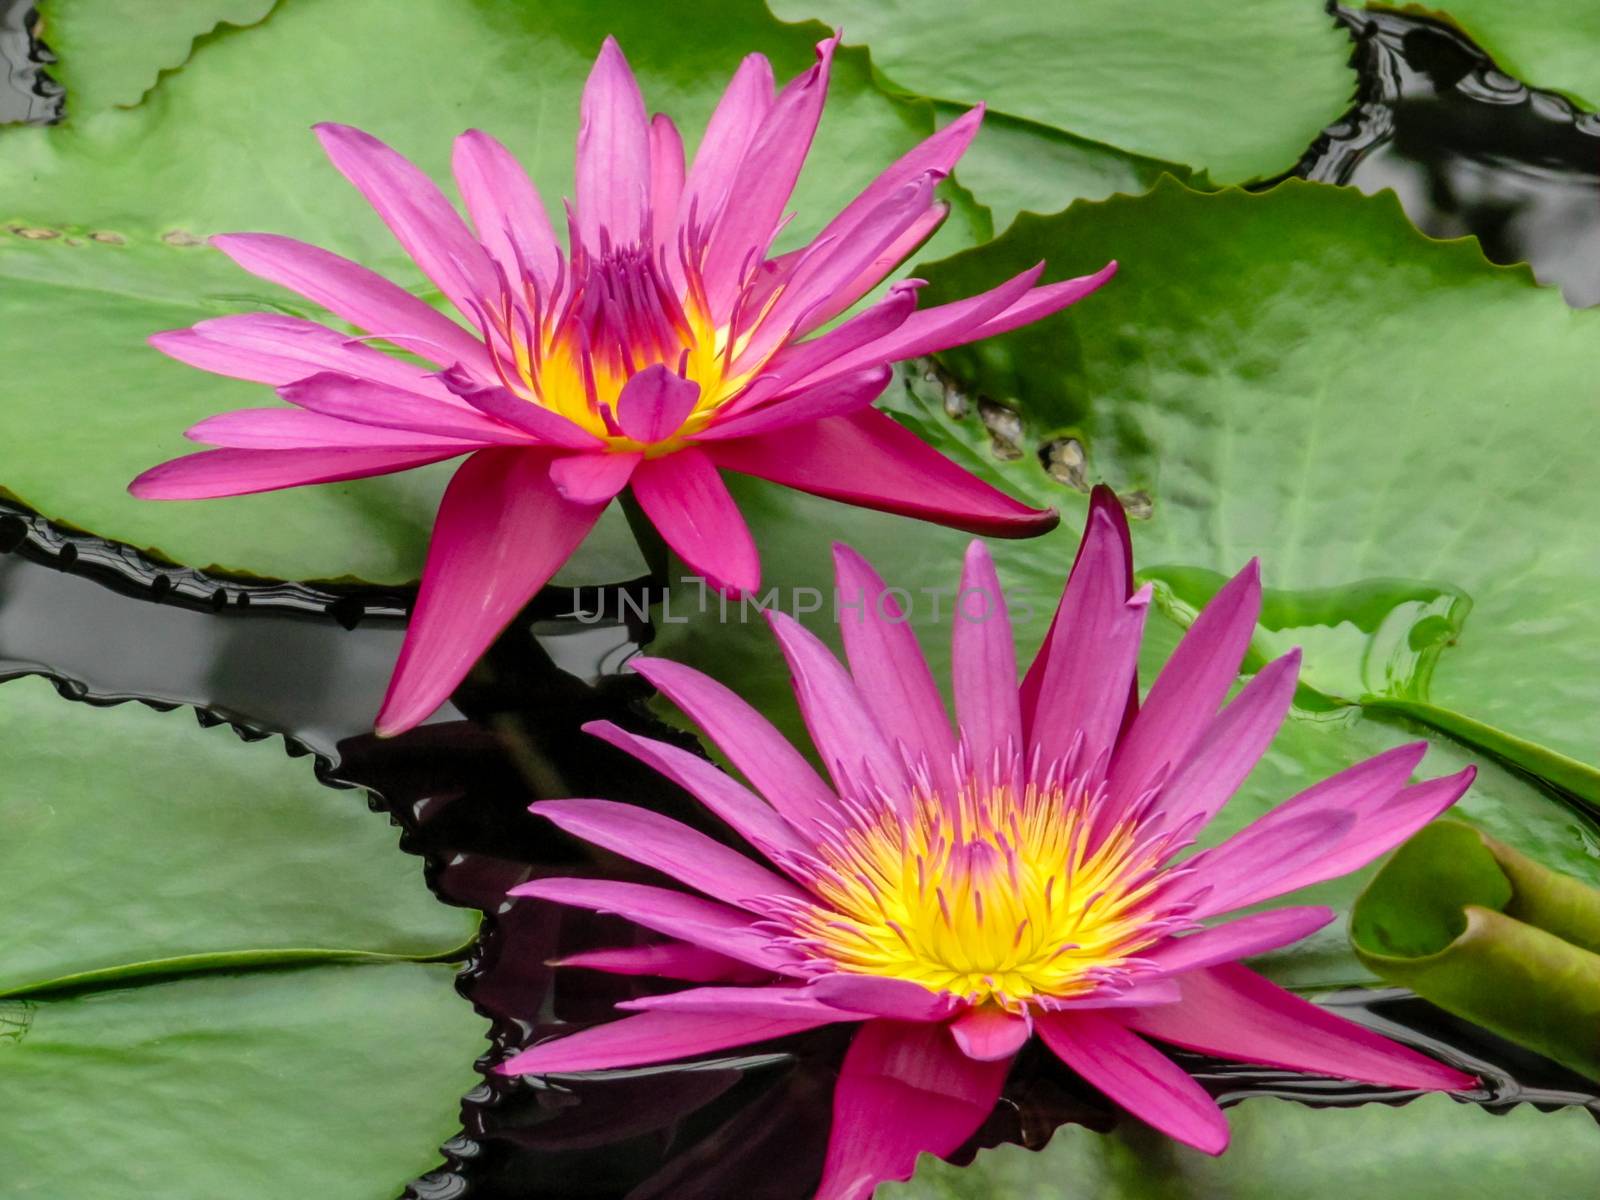 Pink and yellow waterlily flowers by magicbones